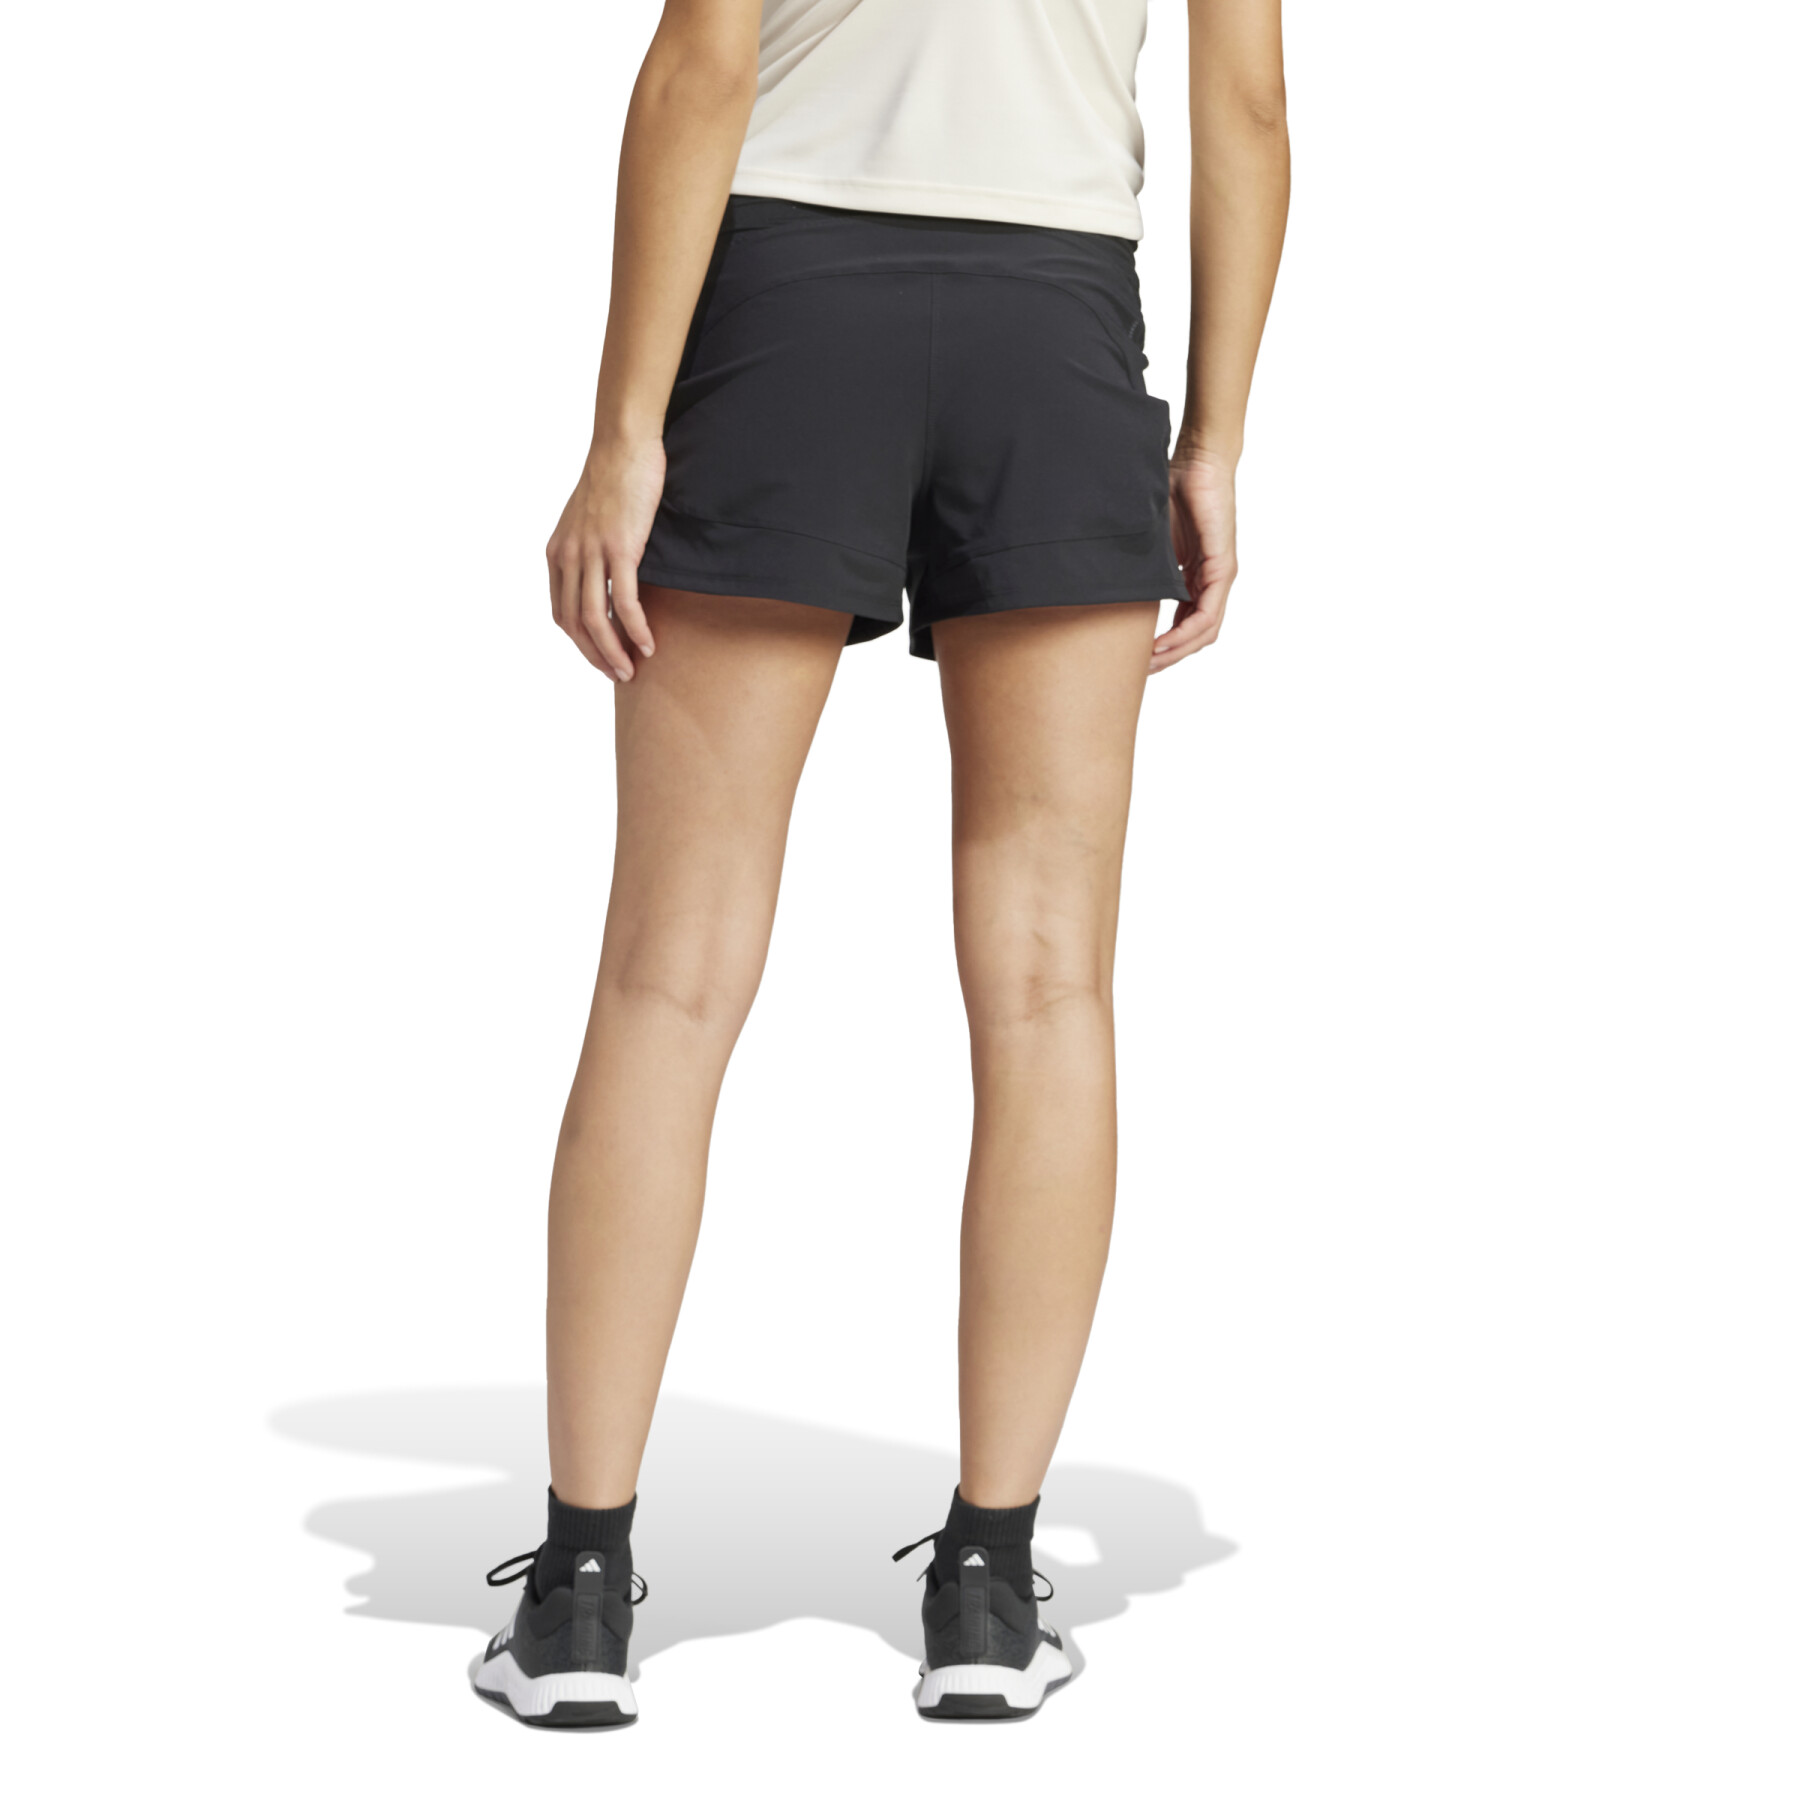 Women's woven stretch shorts adidas Pacer Maternity